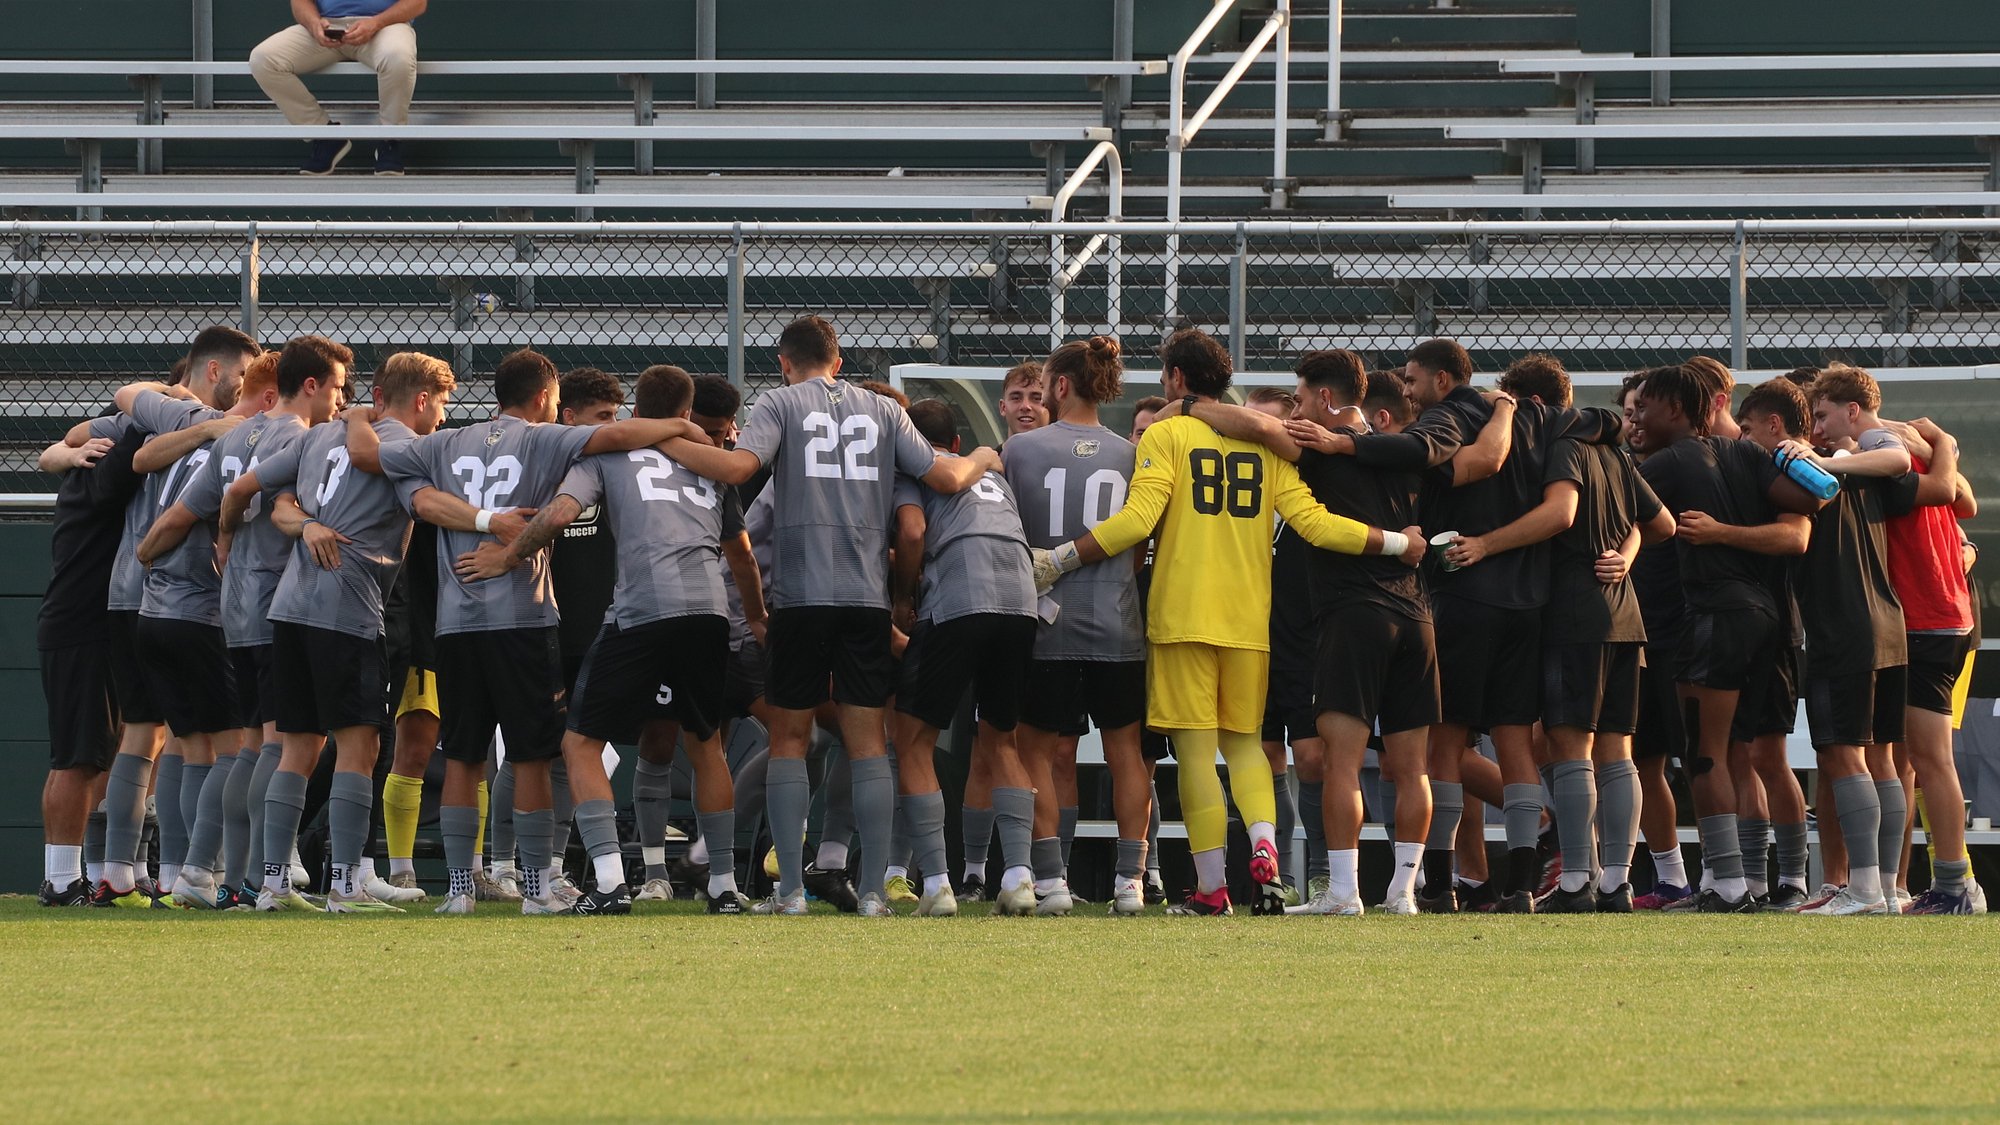 Bryant men's soccer canceled due to inclement weather